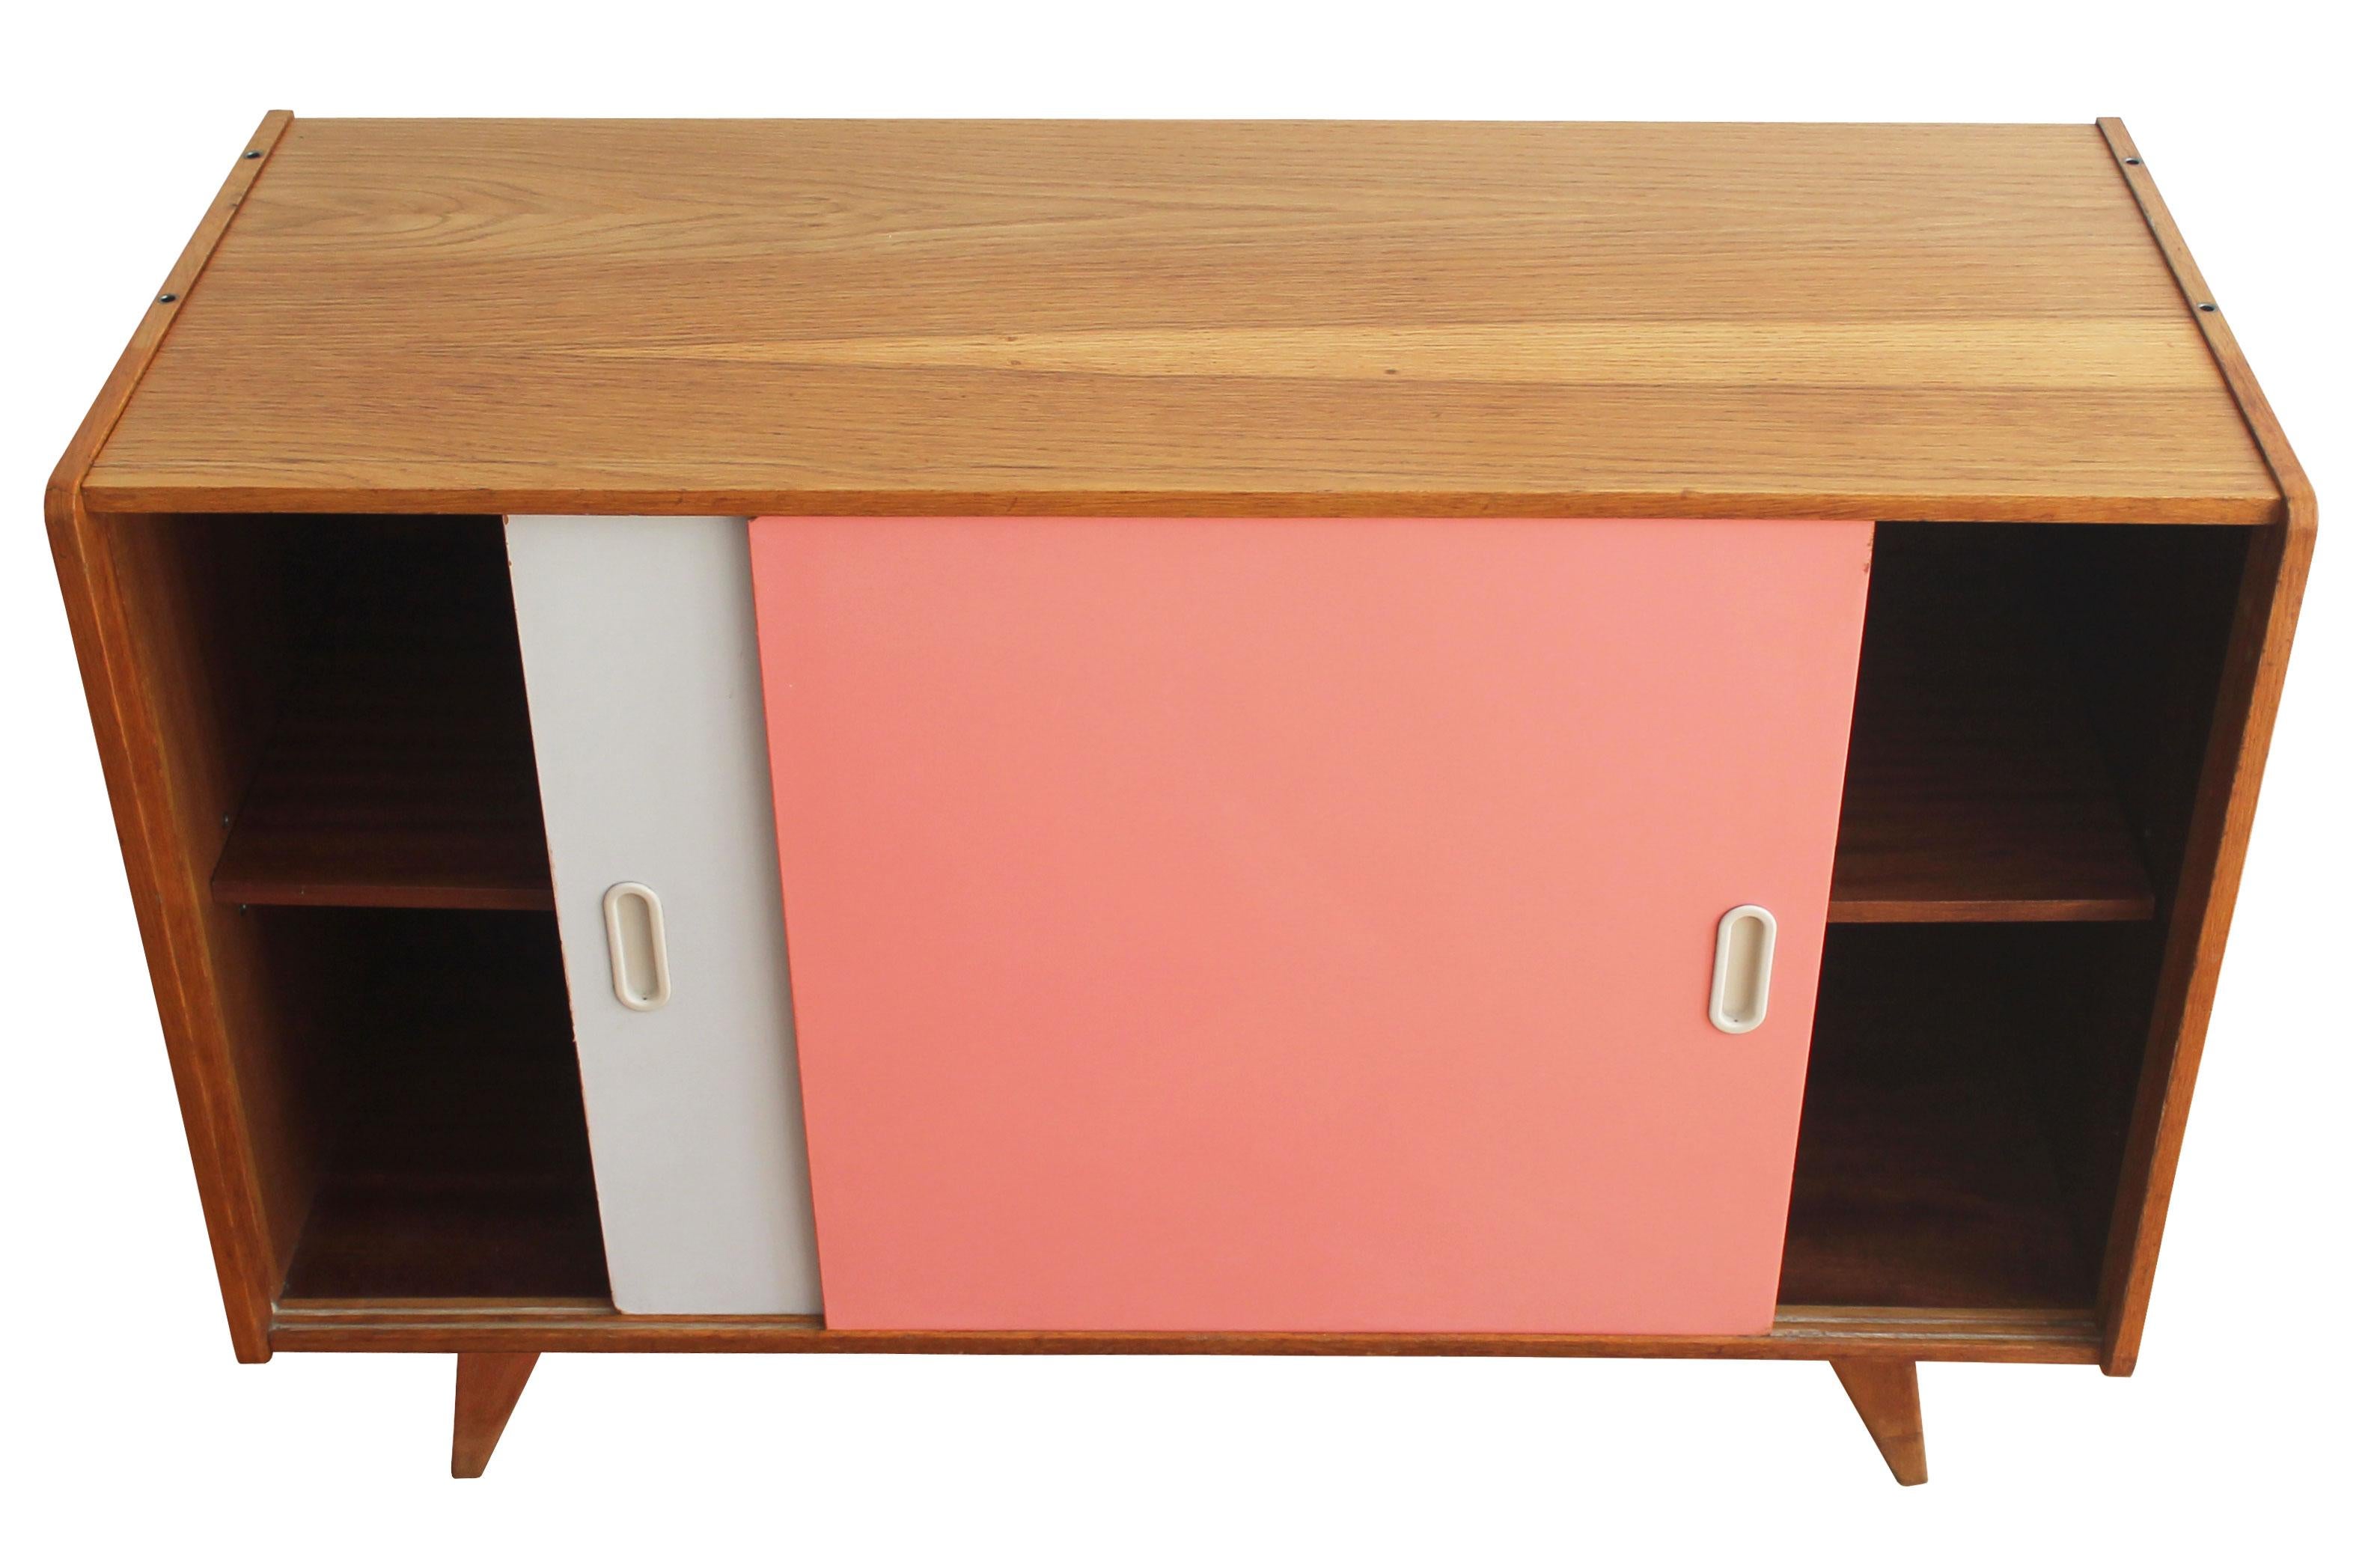 The U-452 mid-century sideboard with pink and white sliding doors, was designed by the Czech furniture designer Jiri Jiroutek. It is part of the popular U collection manufactured by Interier Praha in the 1960s Czechoslovakia. 

This piece